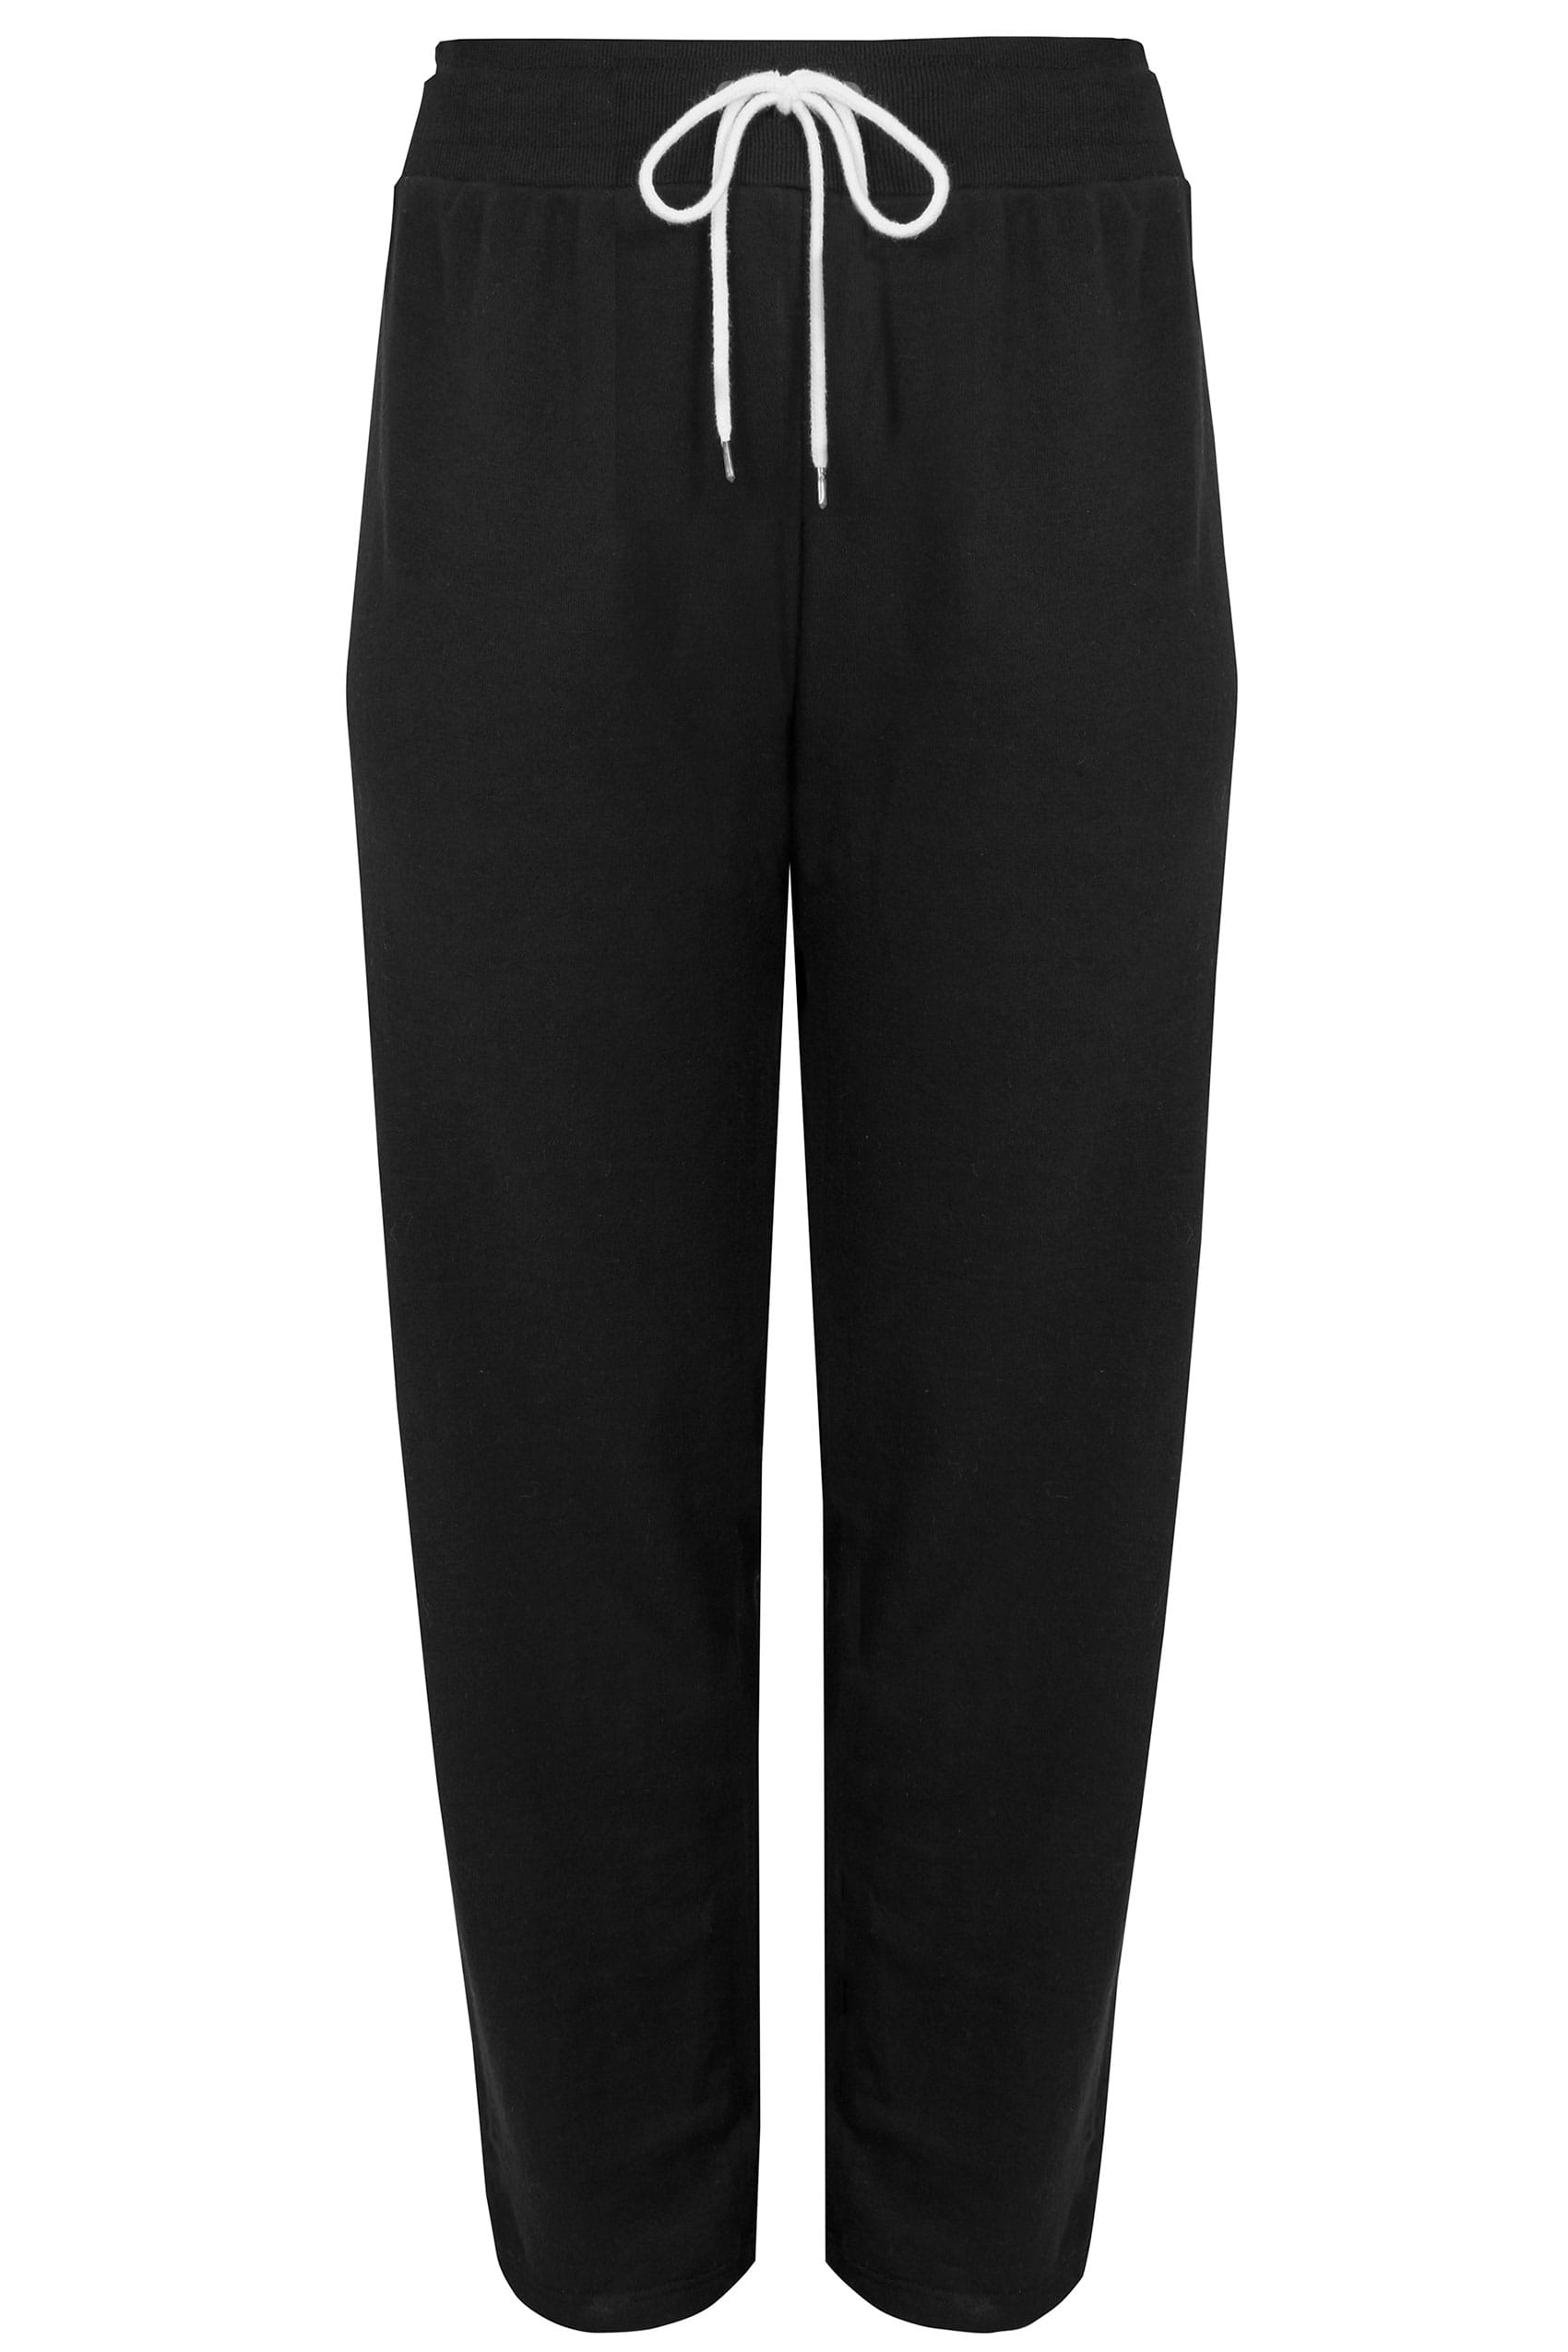 Black Joggers With Drawstring Waist, Plus size 16 to 36